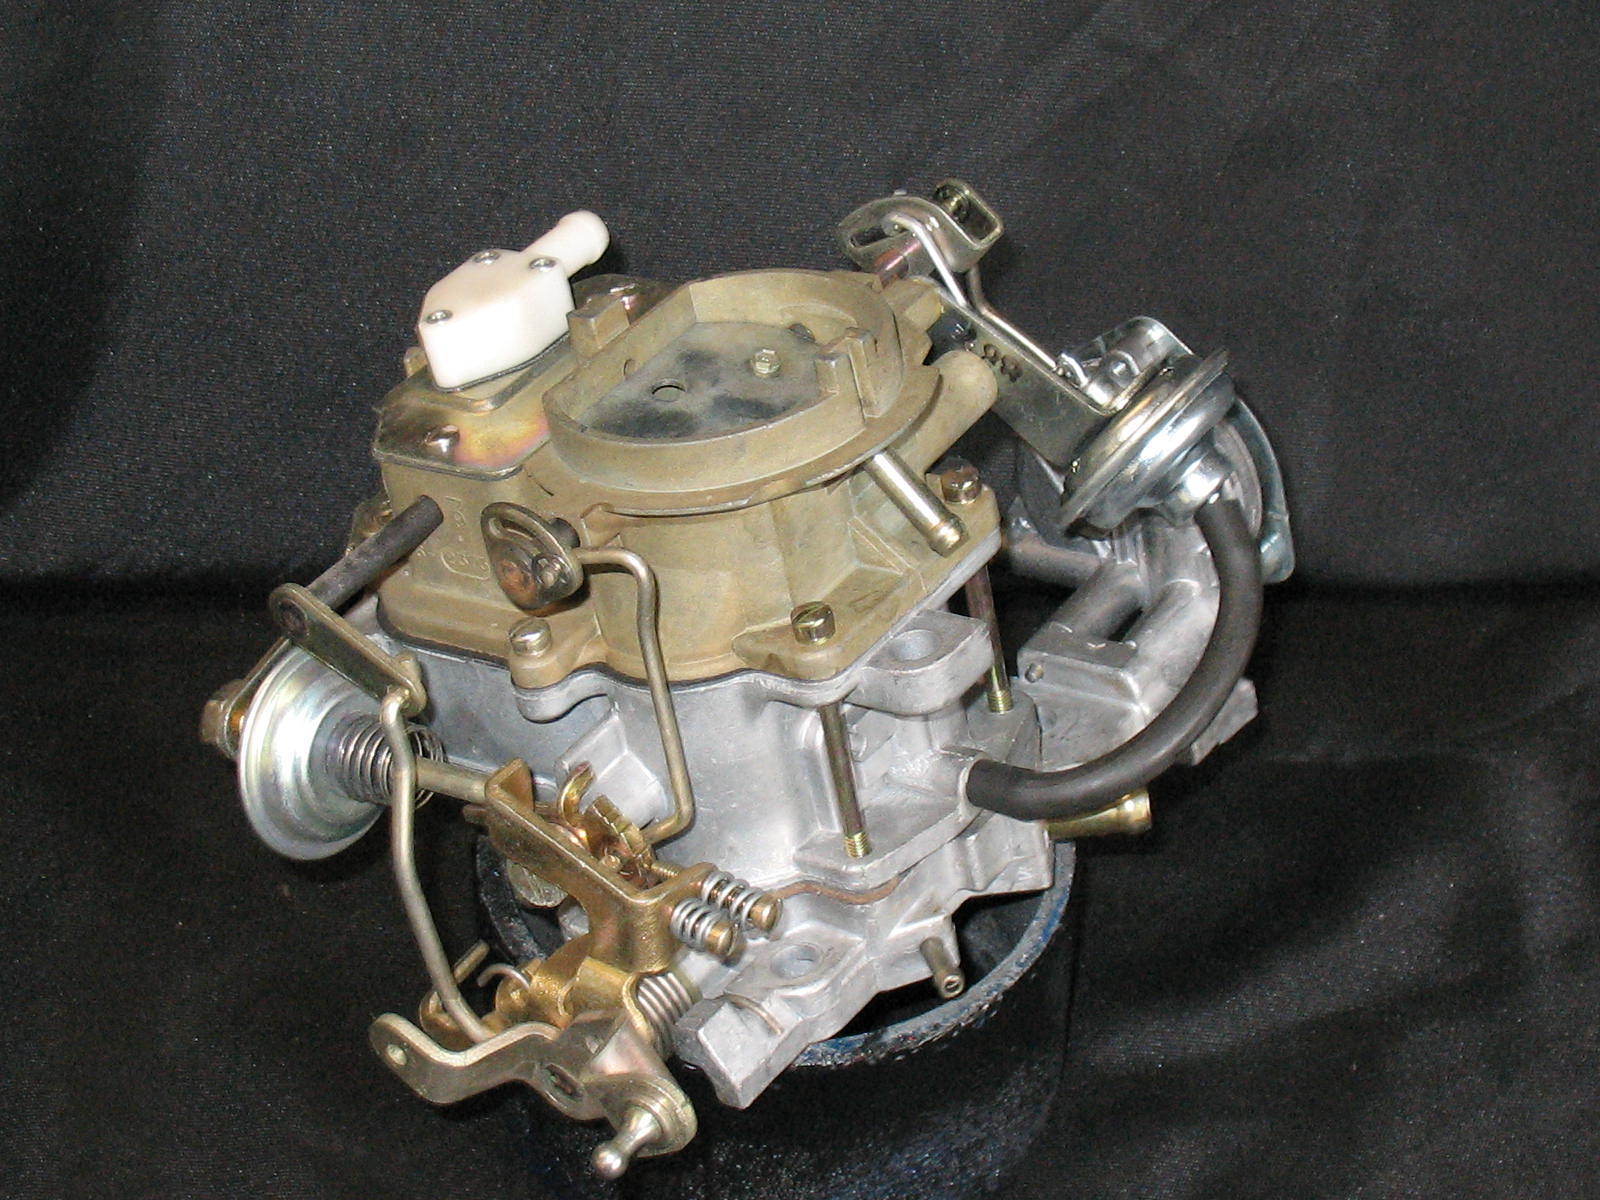 ROS 1978 Carter BBD JEEP 2Bbl carburetor 8284S 258 eng all Trans Bolt on Ready